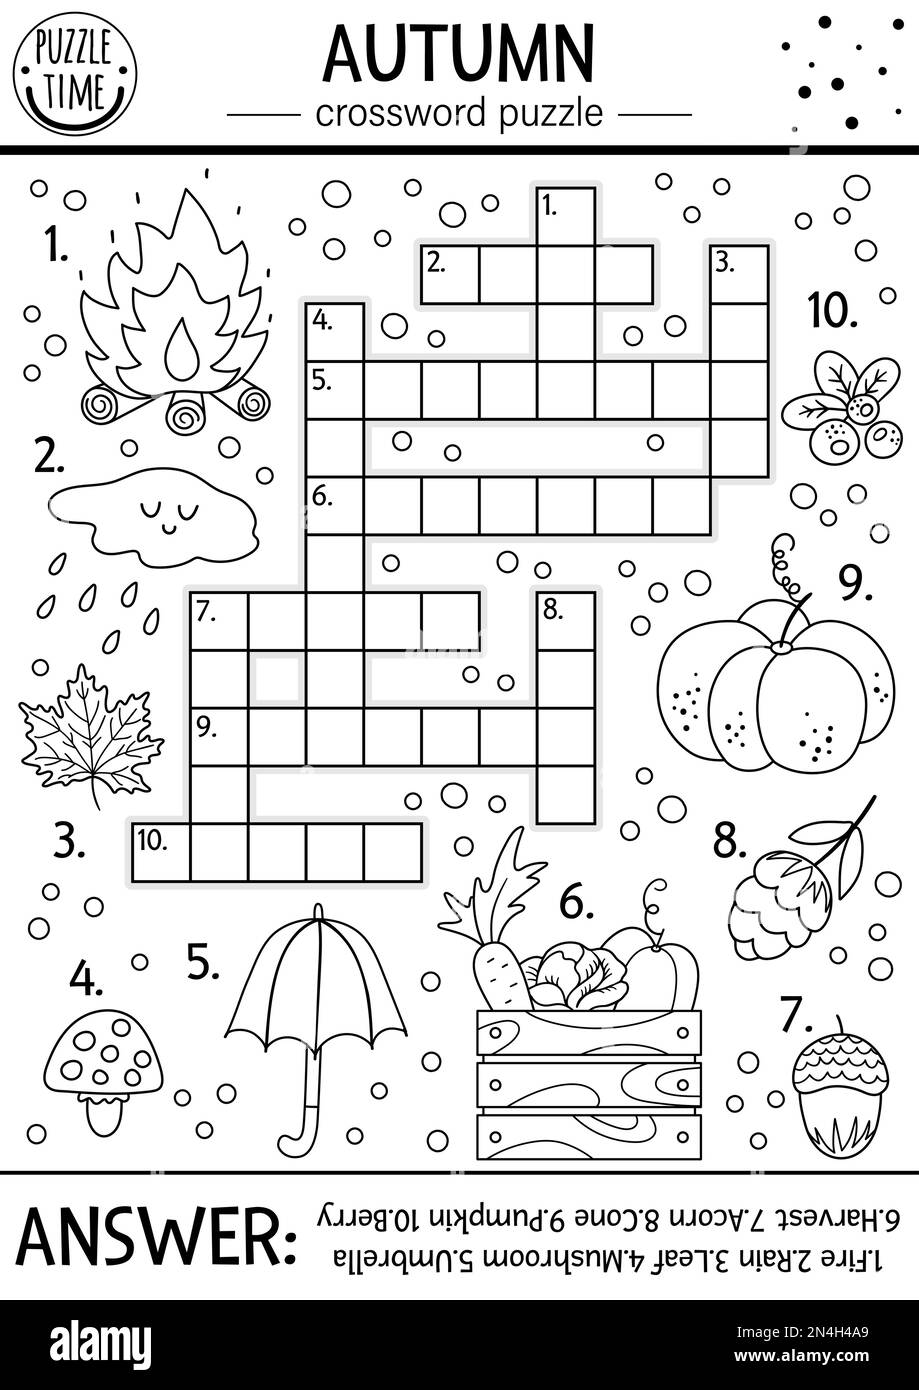 293,180 School Coloring Pages Images, Stock Photos, 3D objects